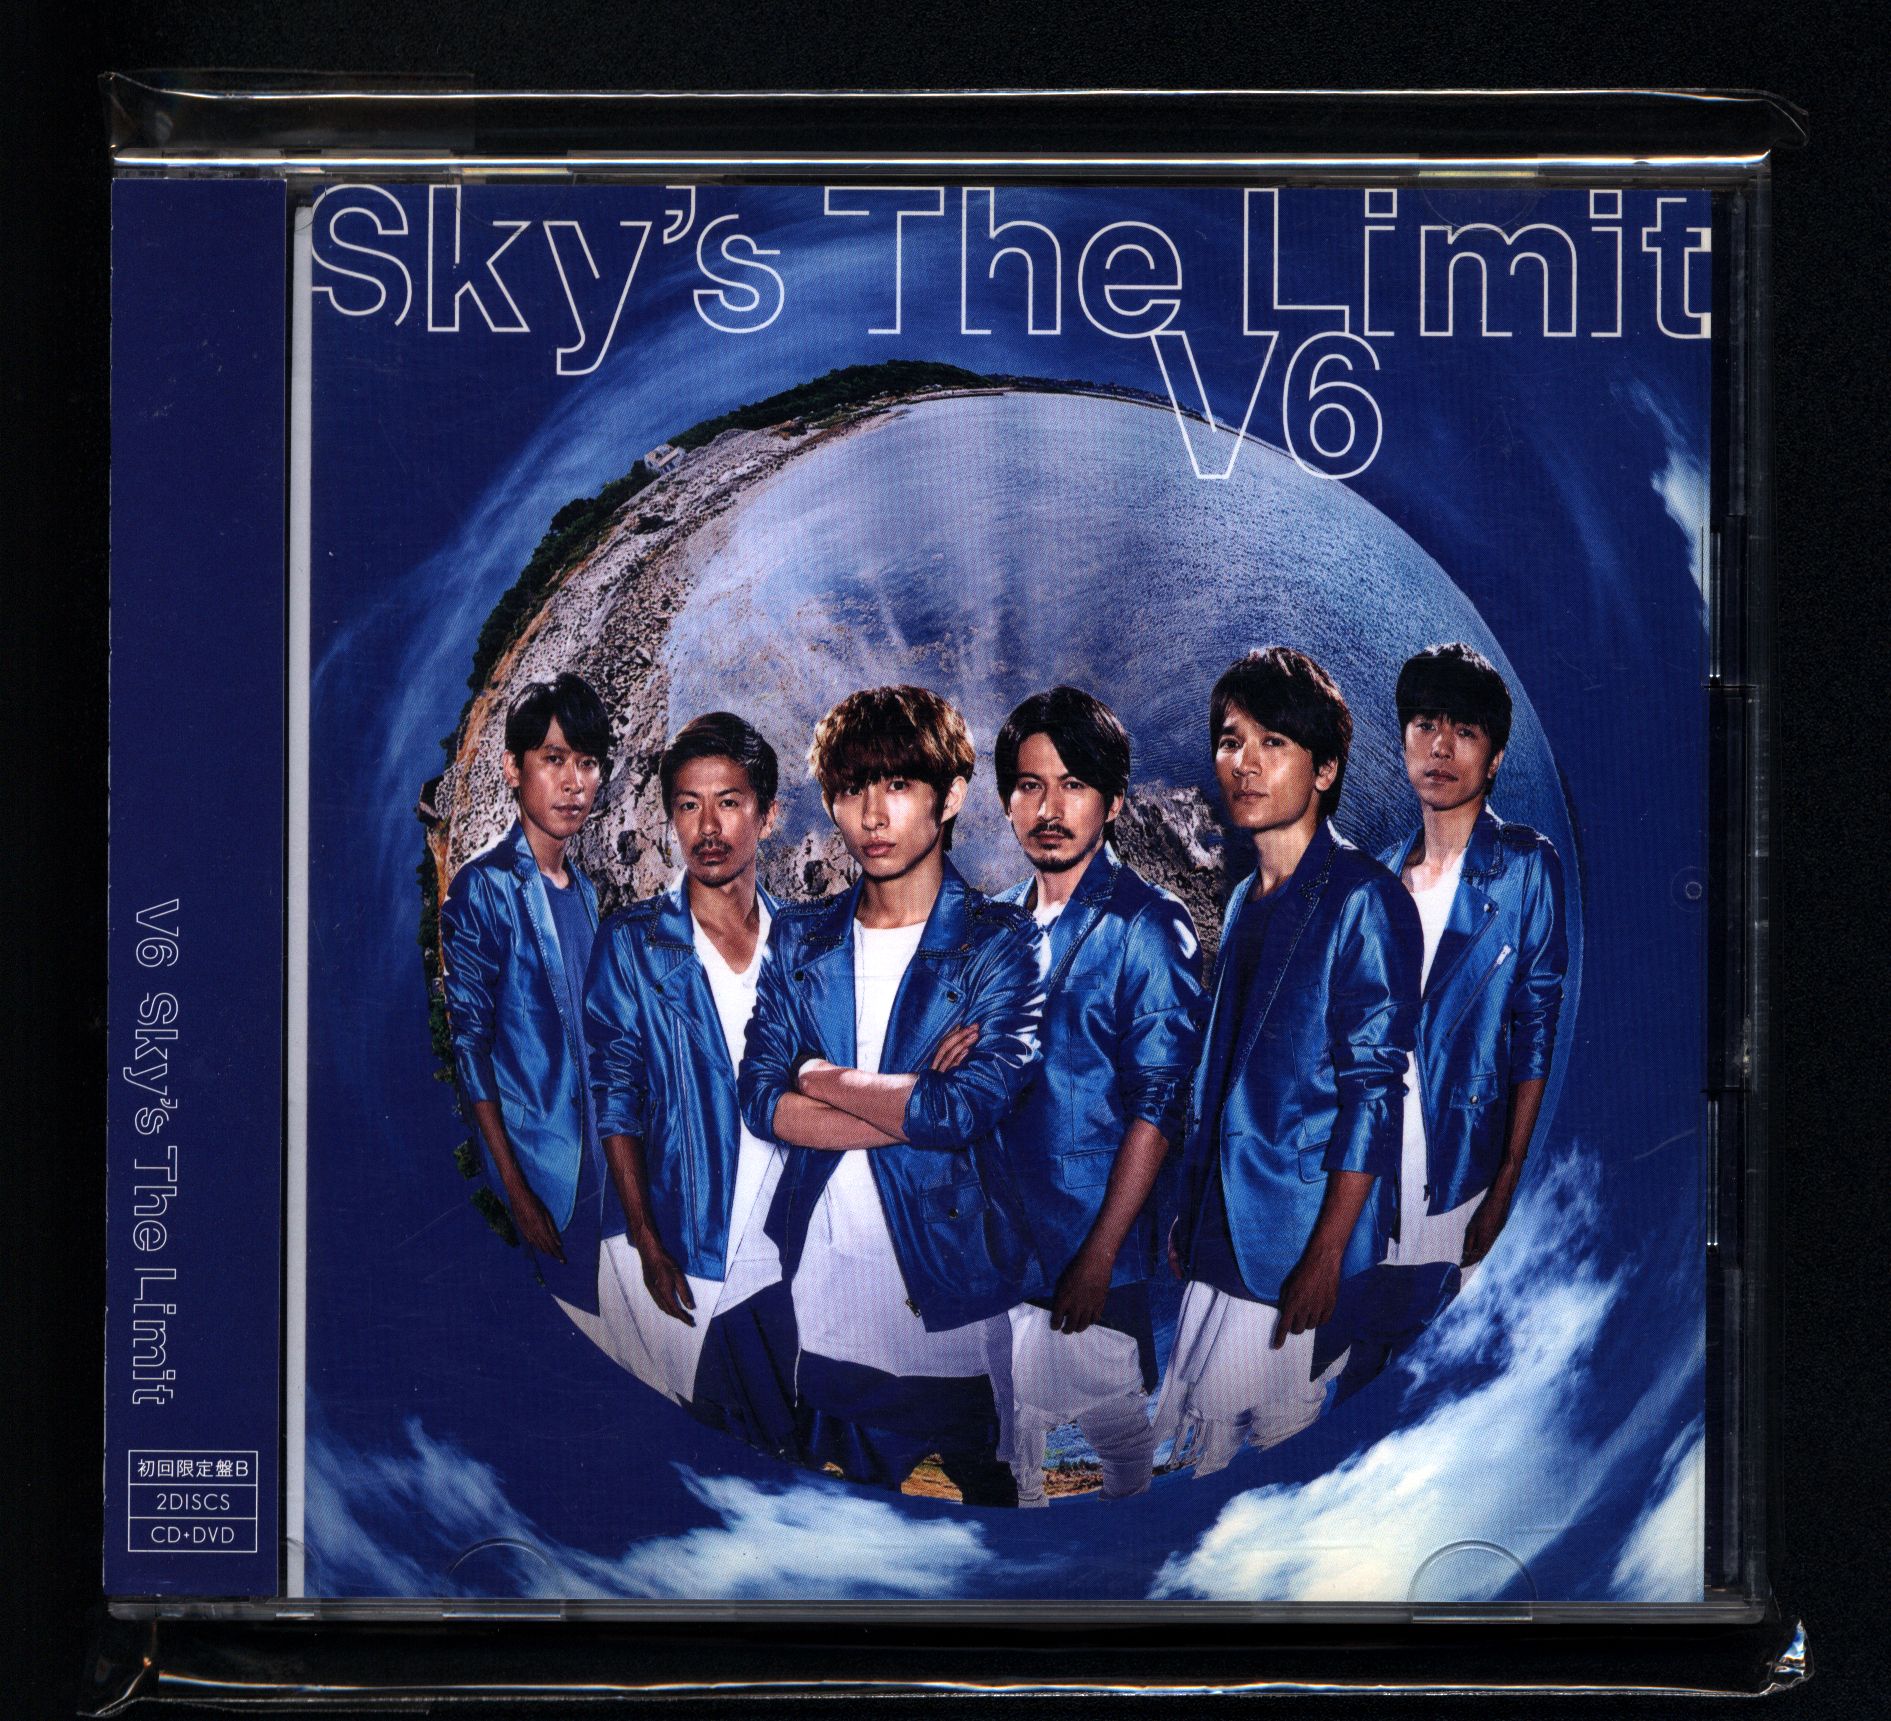 V6 Sky S The Limit First Edition Limited Ed Disc B Cd Dvd Dance Video Special Video Recording Just Before The th Anniversary Of Debut Mandarake Online Shop